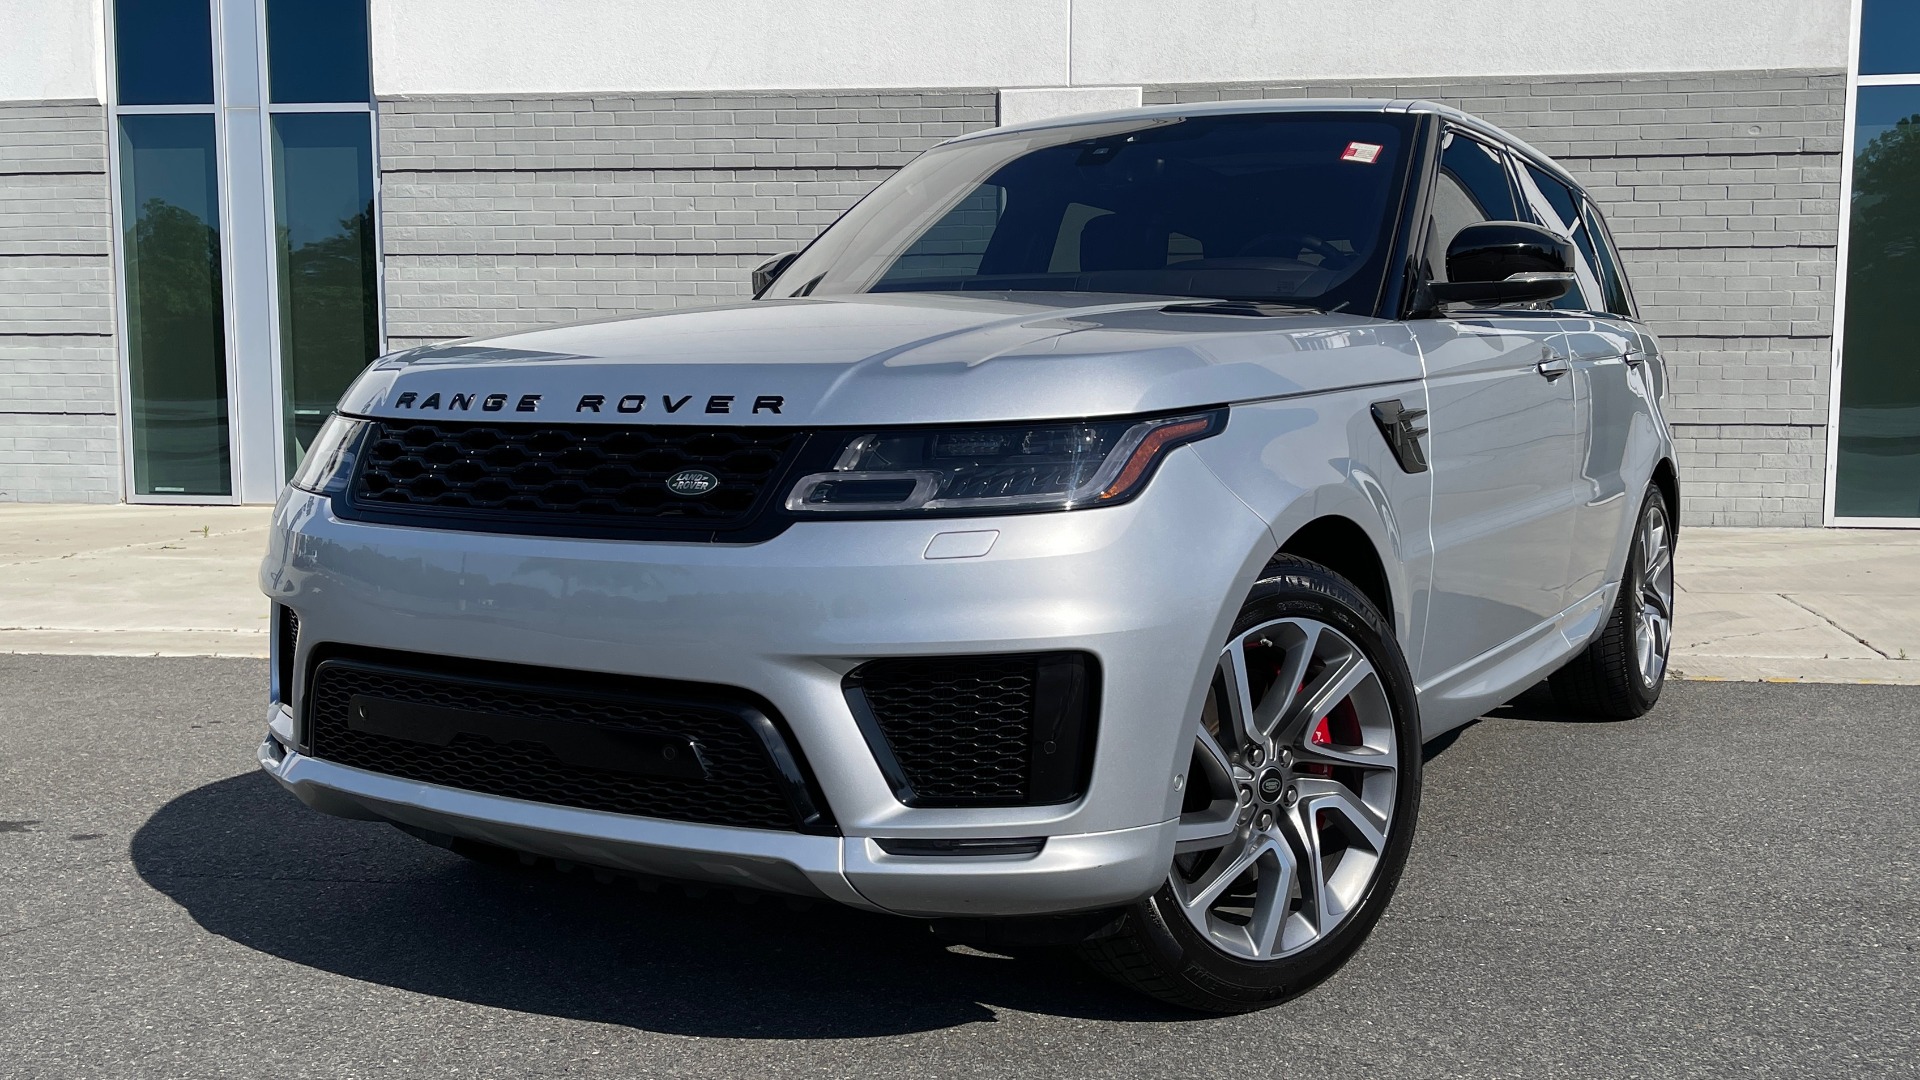 Used 2019 Land Rover RANGE ROVER SPORT HSE DYNAMIC / 3.0L SC V6 / 8-SPD / APPLE / NAV / SUNROOF / REARVIEW for sale Sold at Formula Imports in Charlotte NC 28227 1